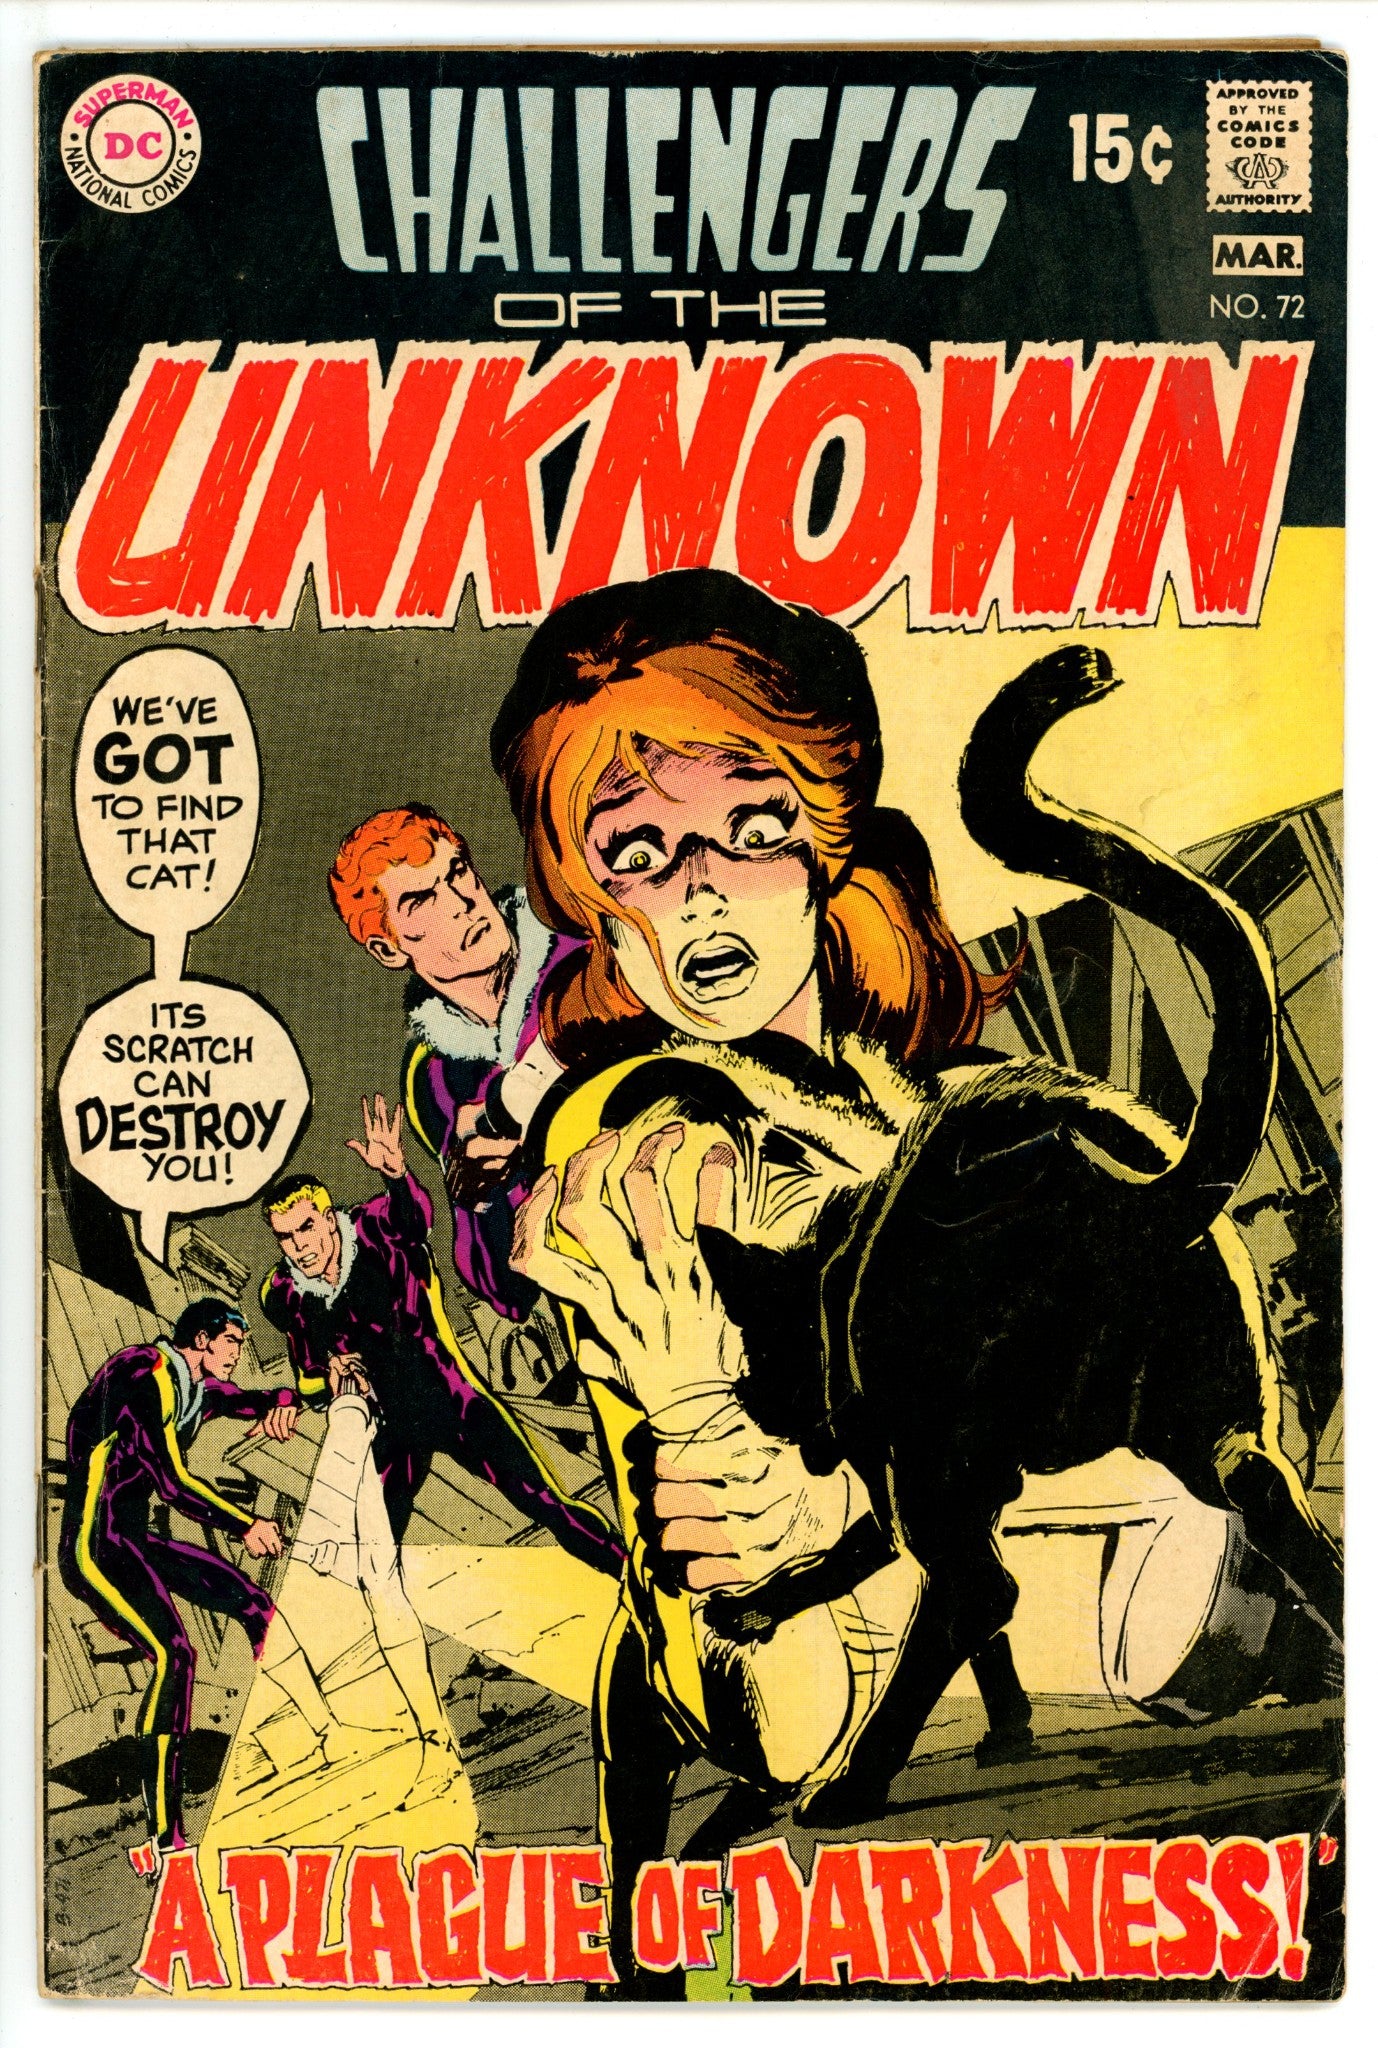 Challengers of the Unknown Vol 1 72 VG (4.0) (1970) 